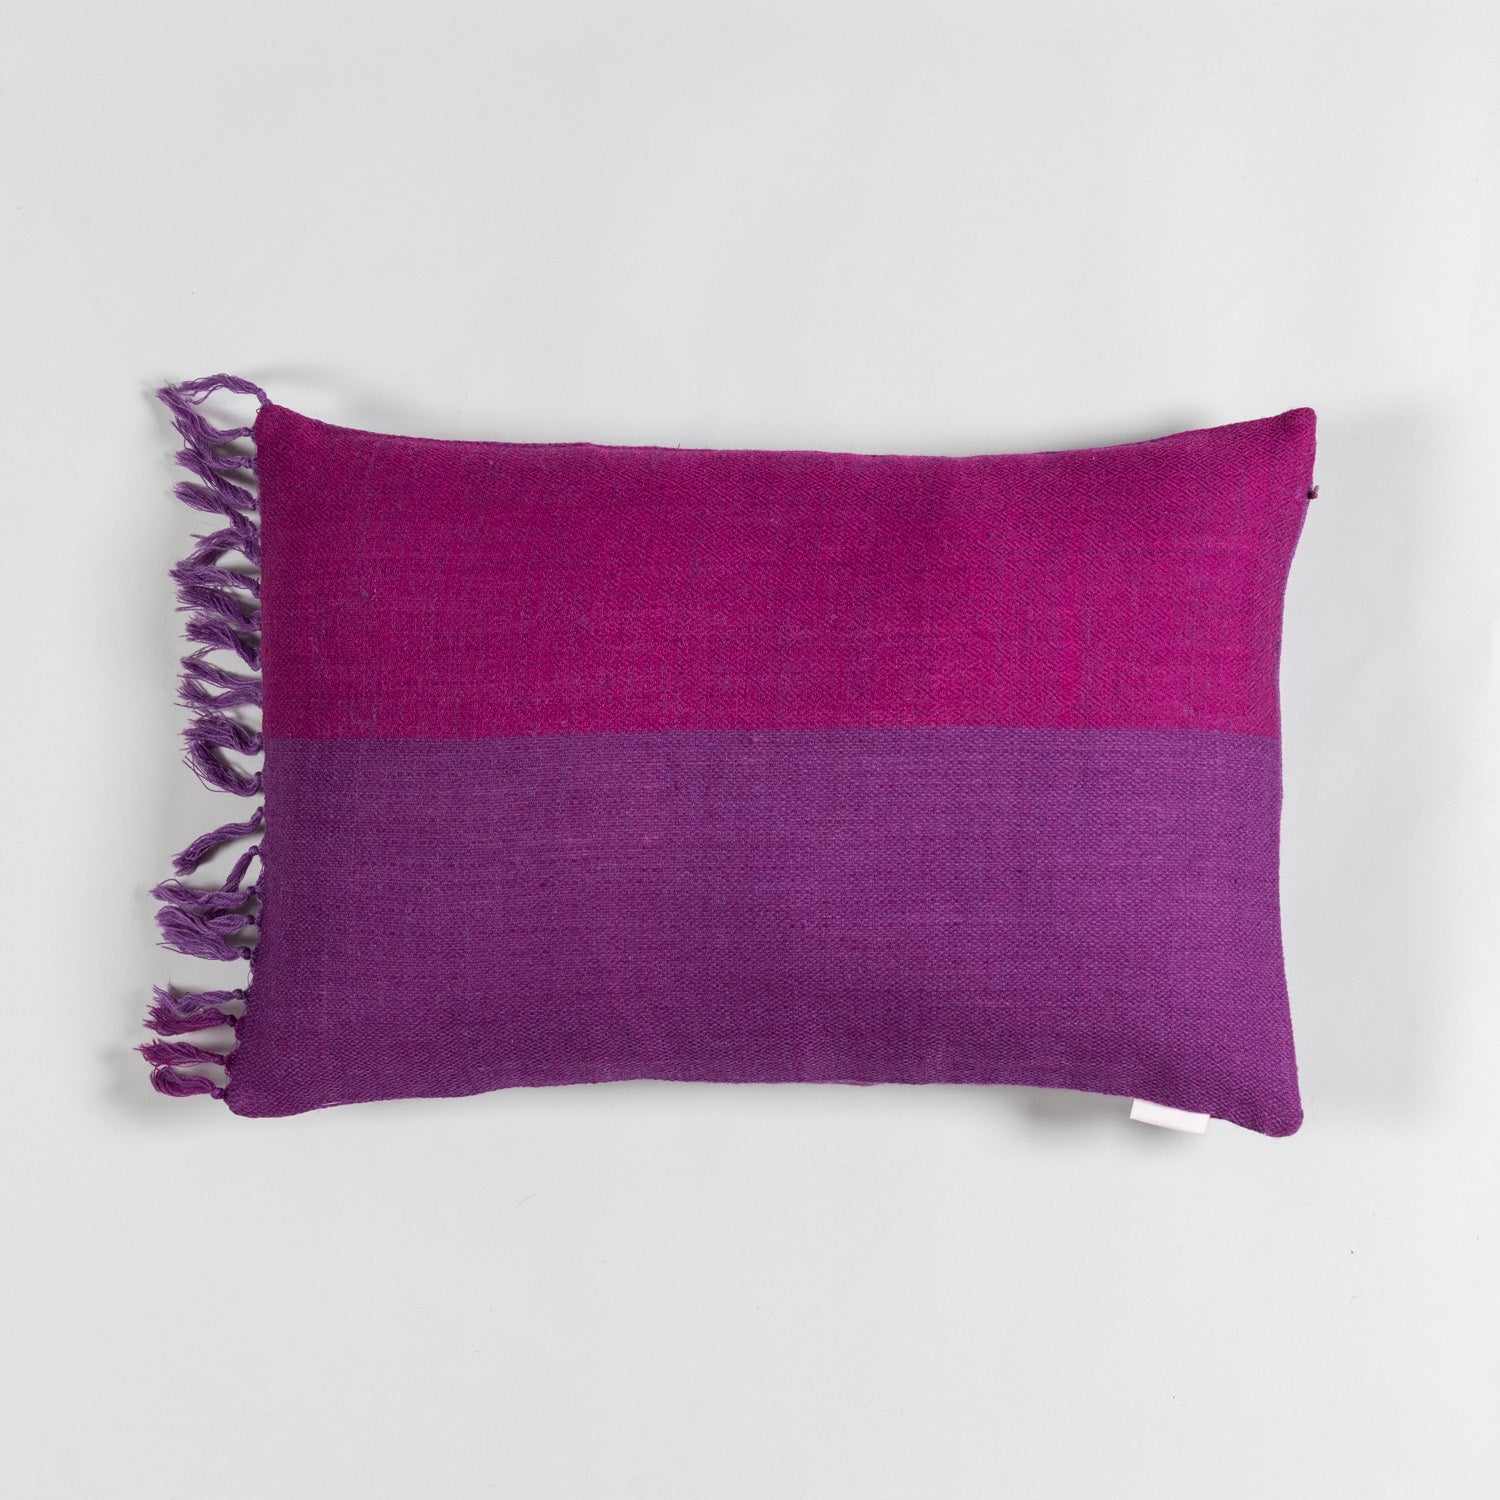 Handwoven Upcycled Purple Wool Cushion Cover - 12x18